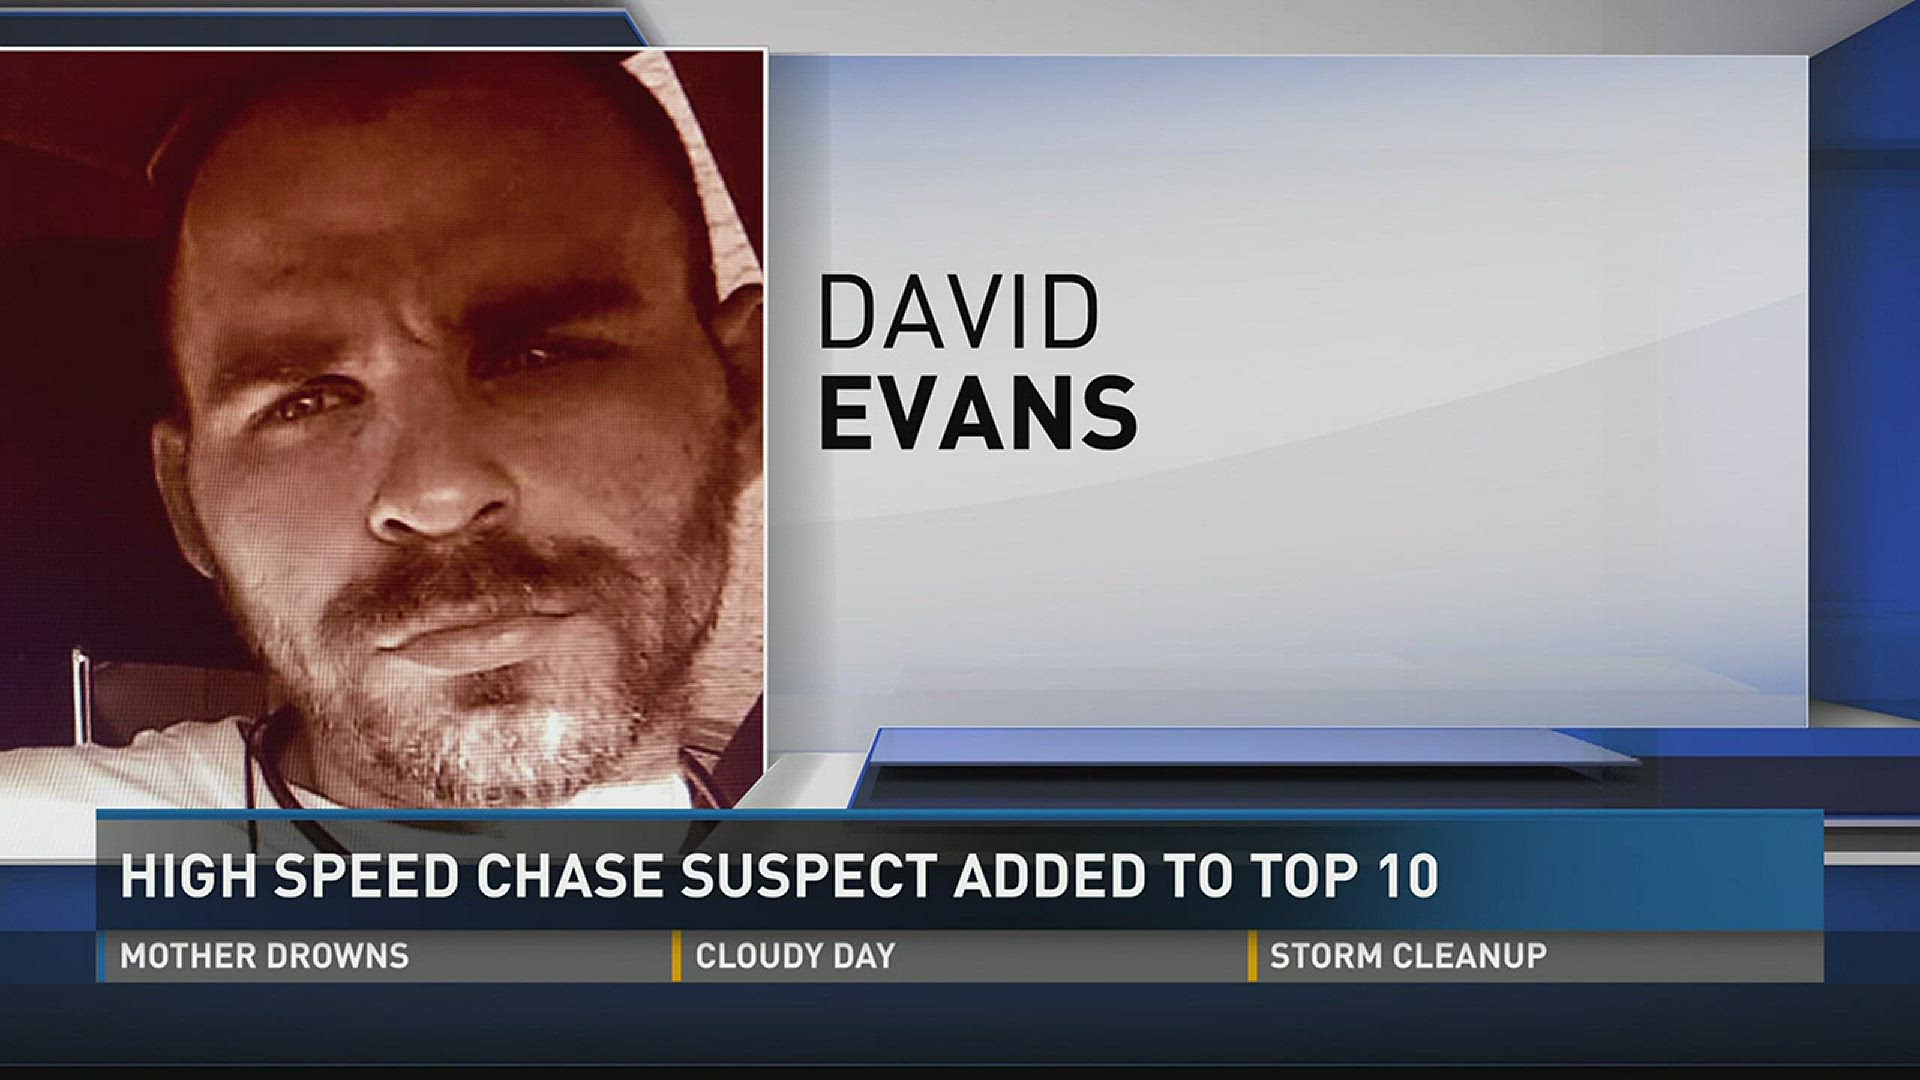 David Evans is considered armed and dangerous. He shot at Claiborne County deputies last week.